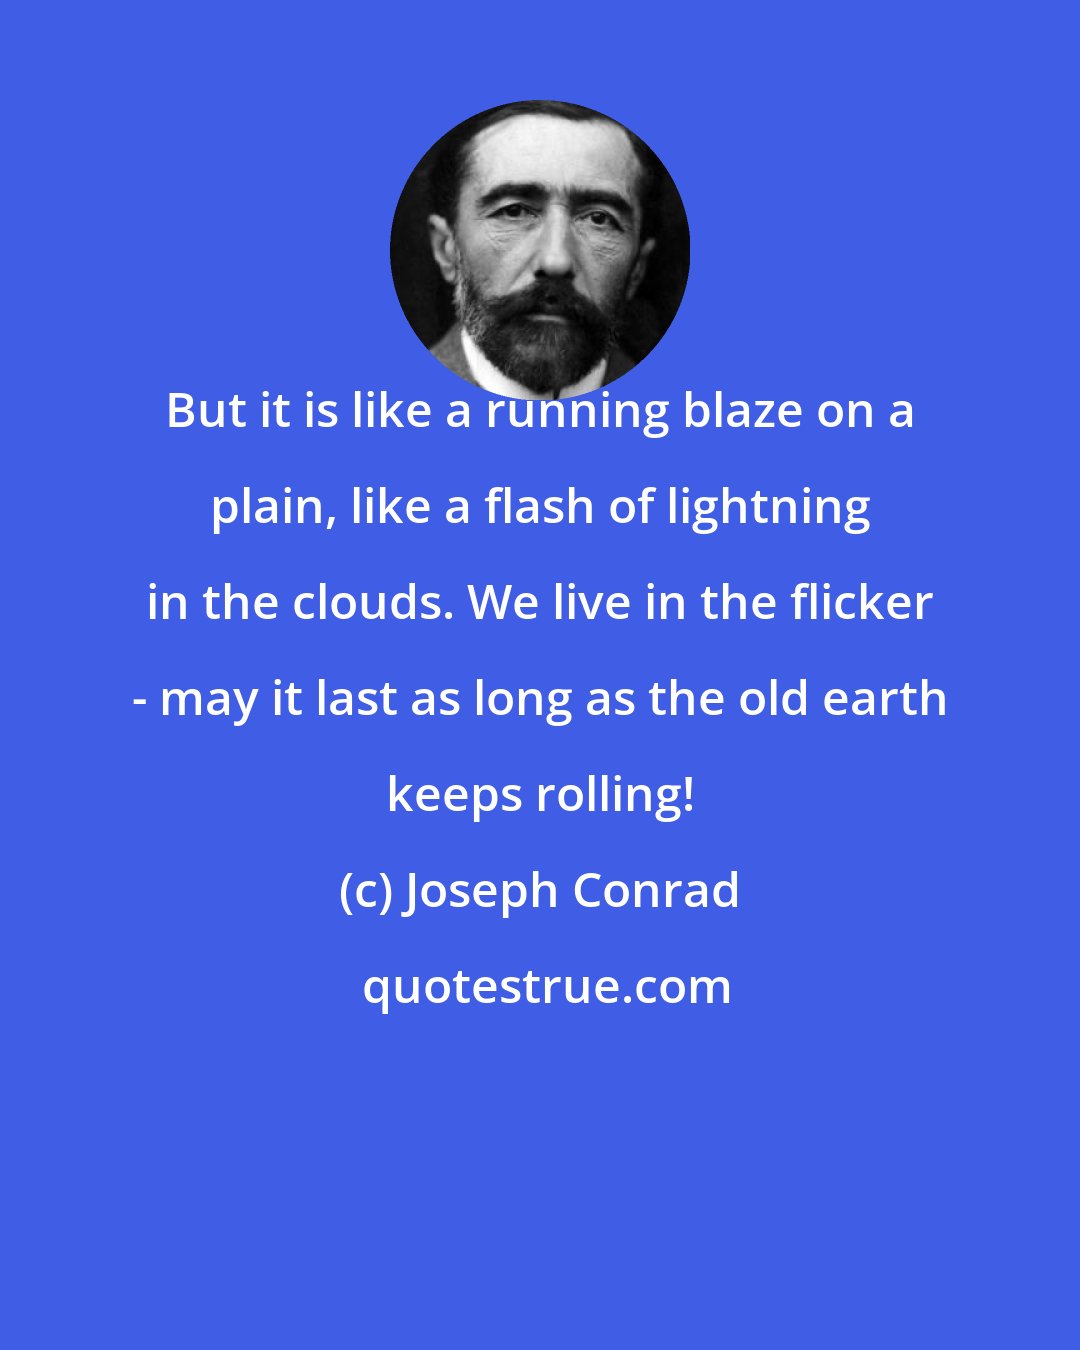 Joseph Conrad: But it is like a running blaze on a plain, like a flash of lightning in the clouds. We live in the flicker - may it last as long as the old earth keeps rolling!